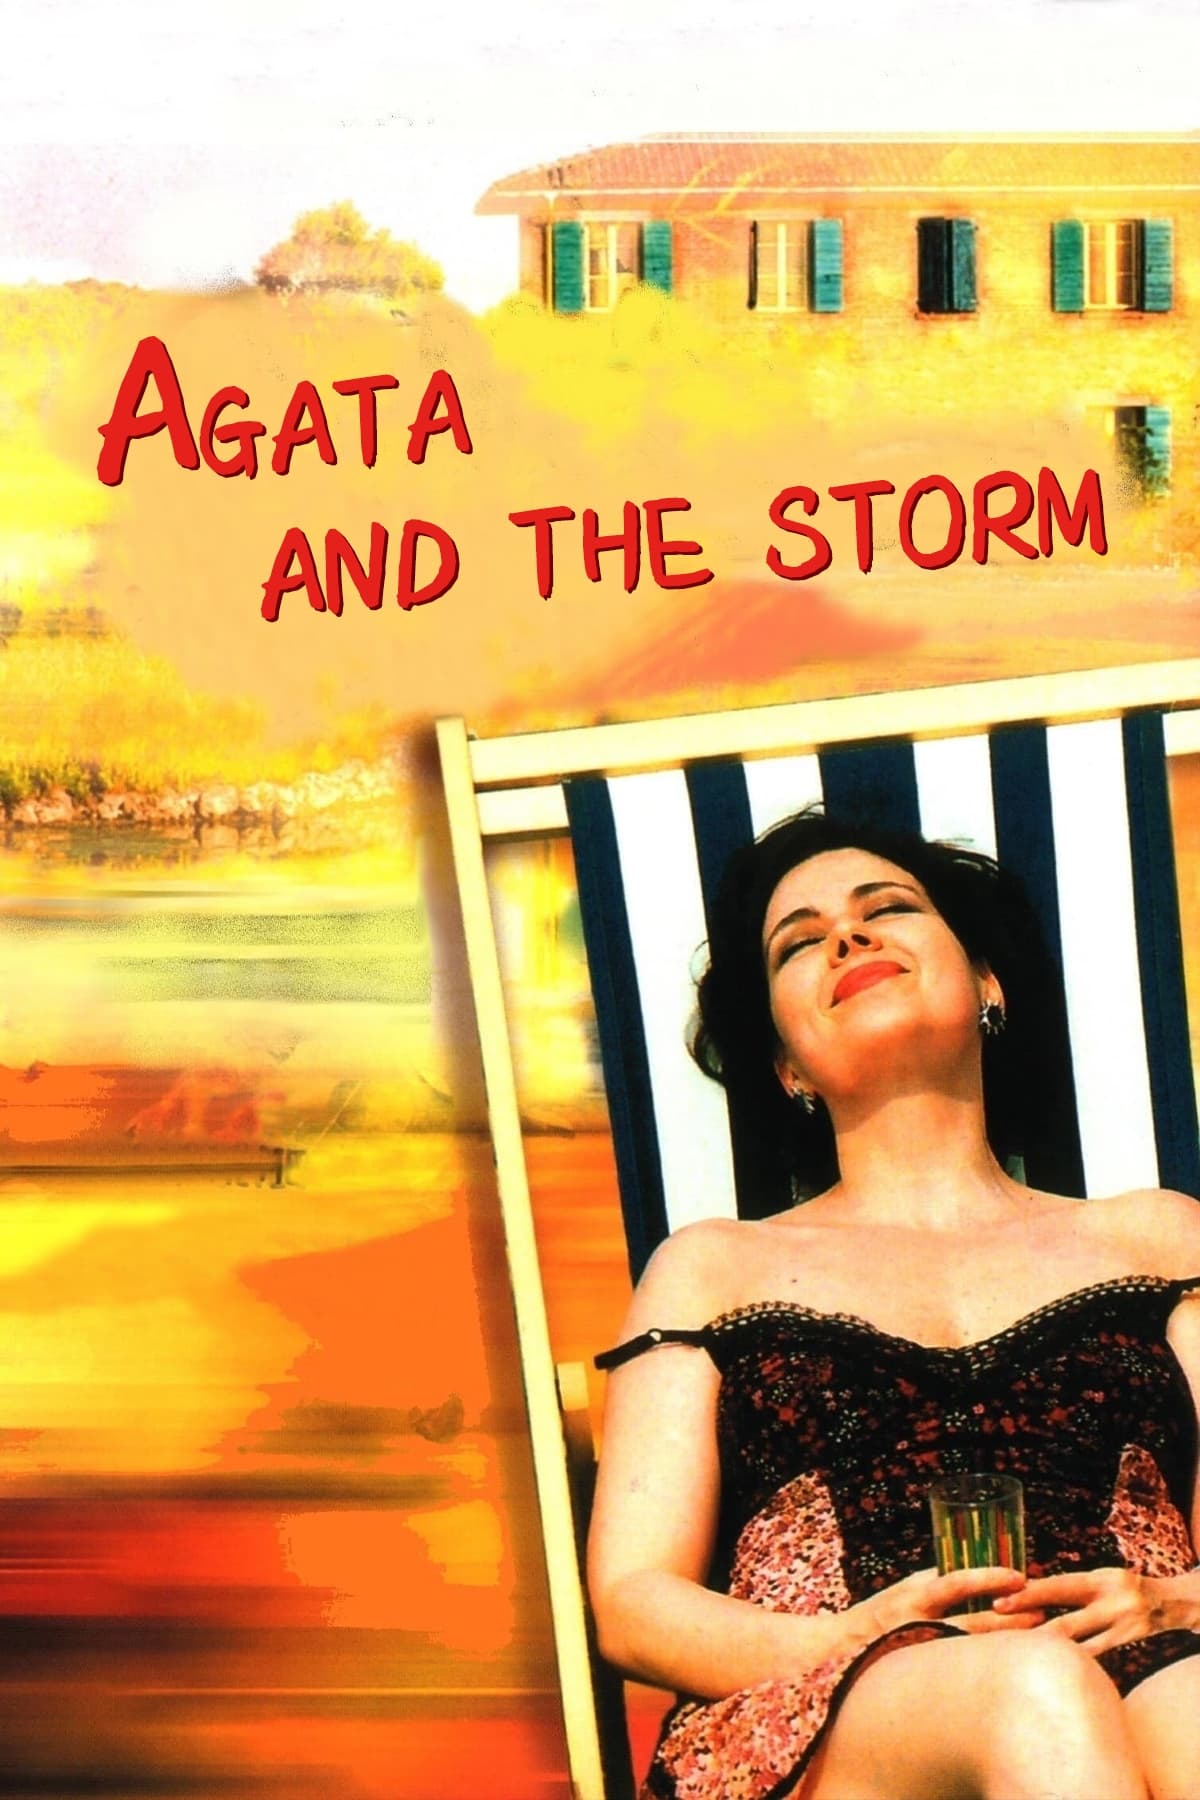 Agatha and the Storm